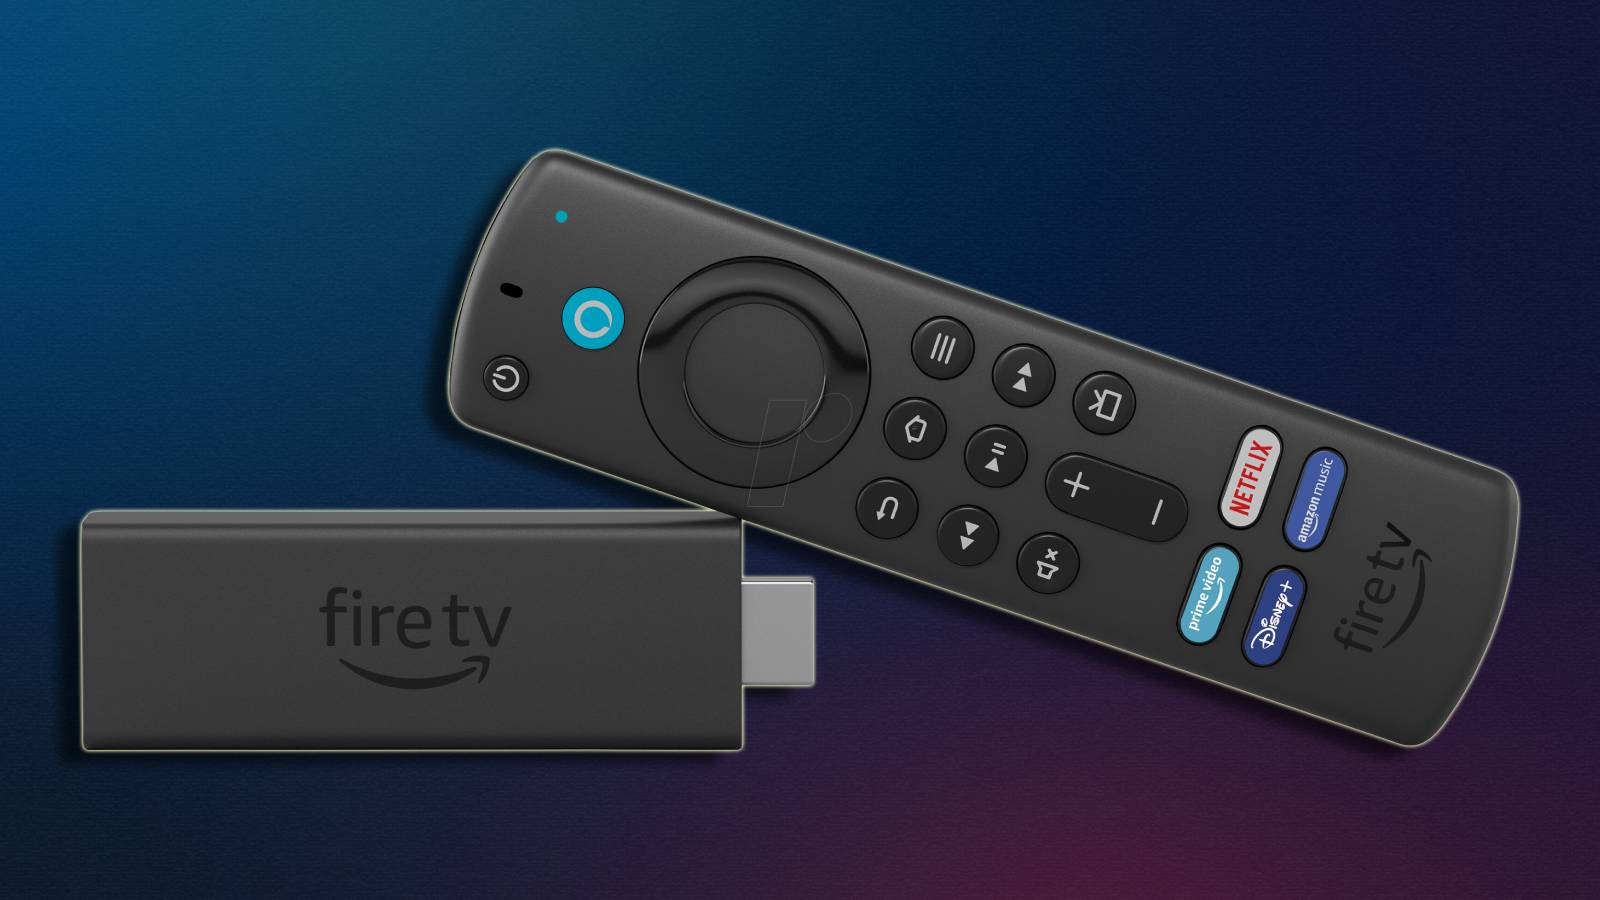 The  Fire TV Stick Lite drops to $16 in an early Black Friday